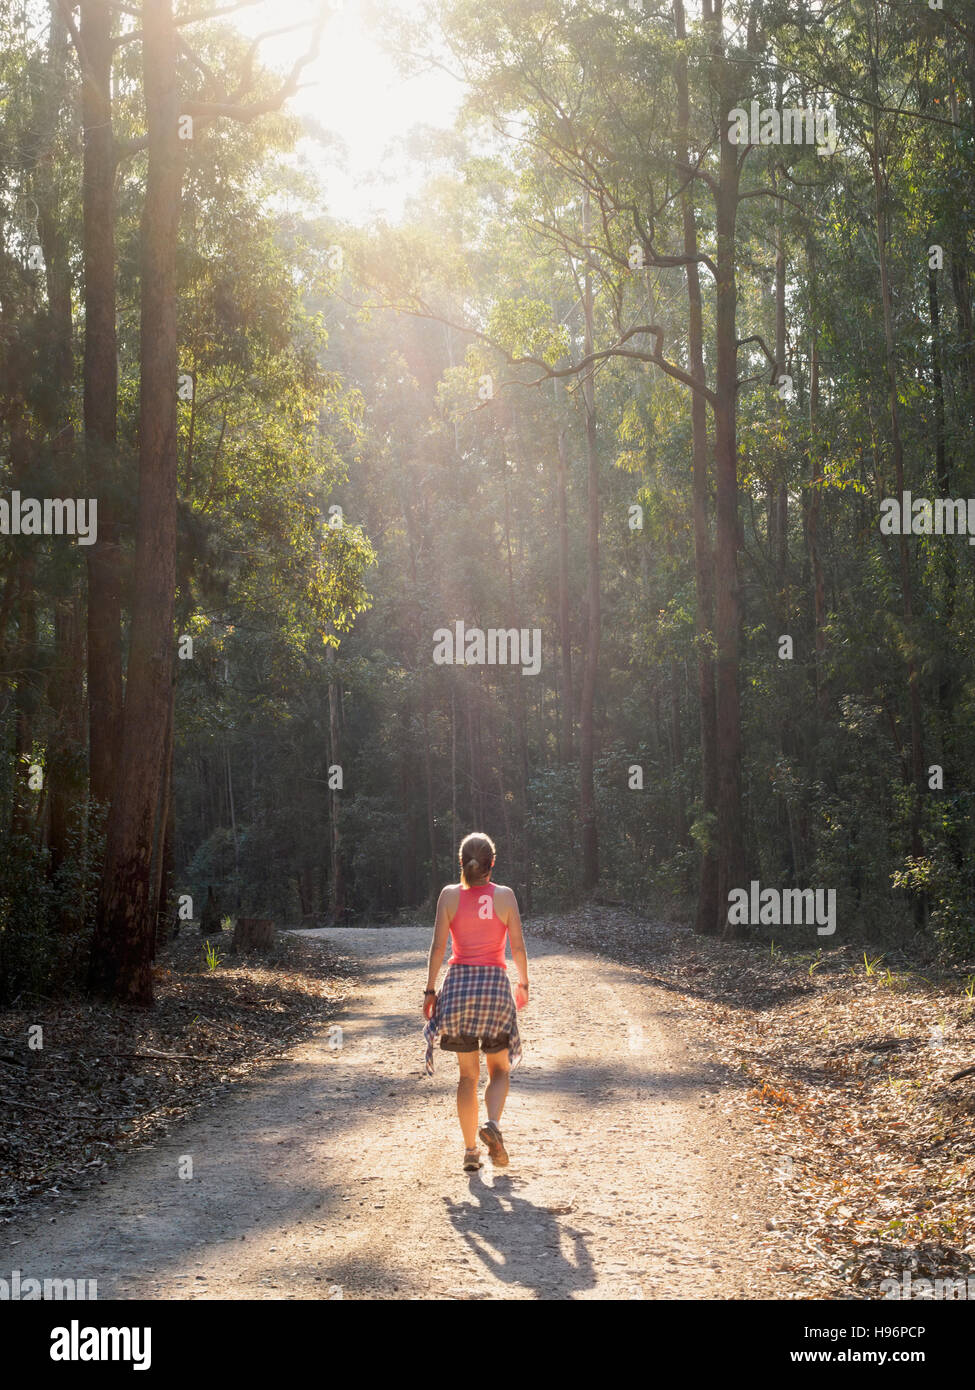 Australia, New South Wales, Port Macquarie, Rear view of mature woman walking along dirt road in forest Stock Photo